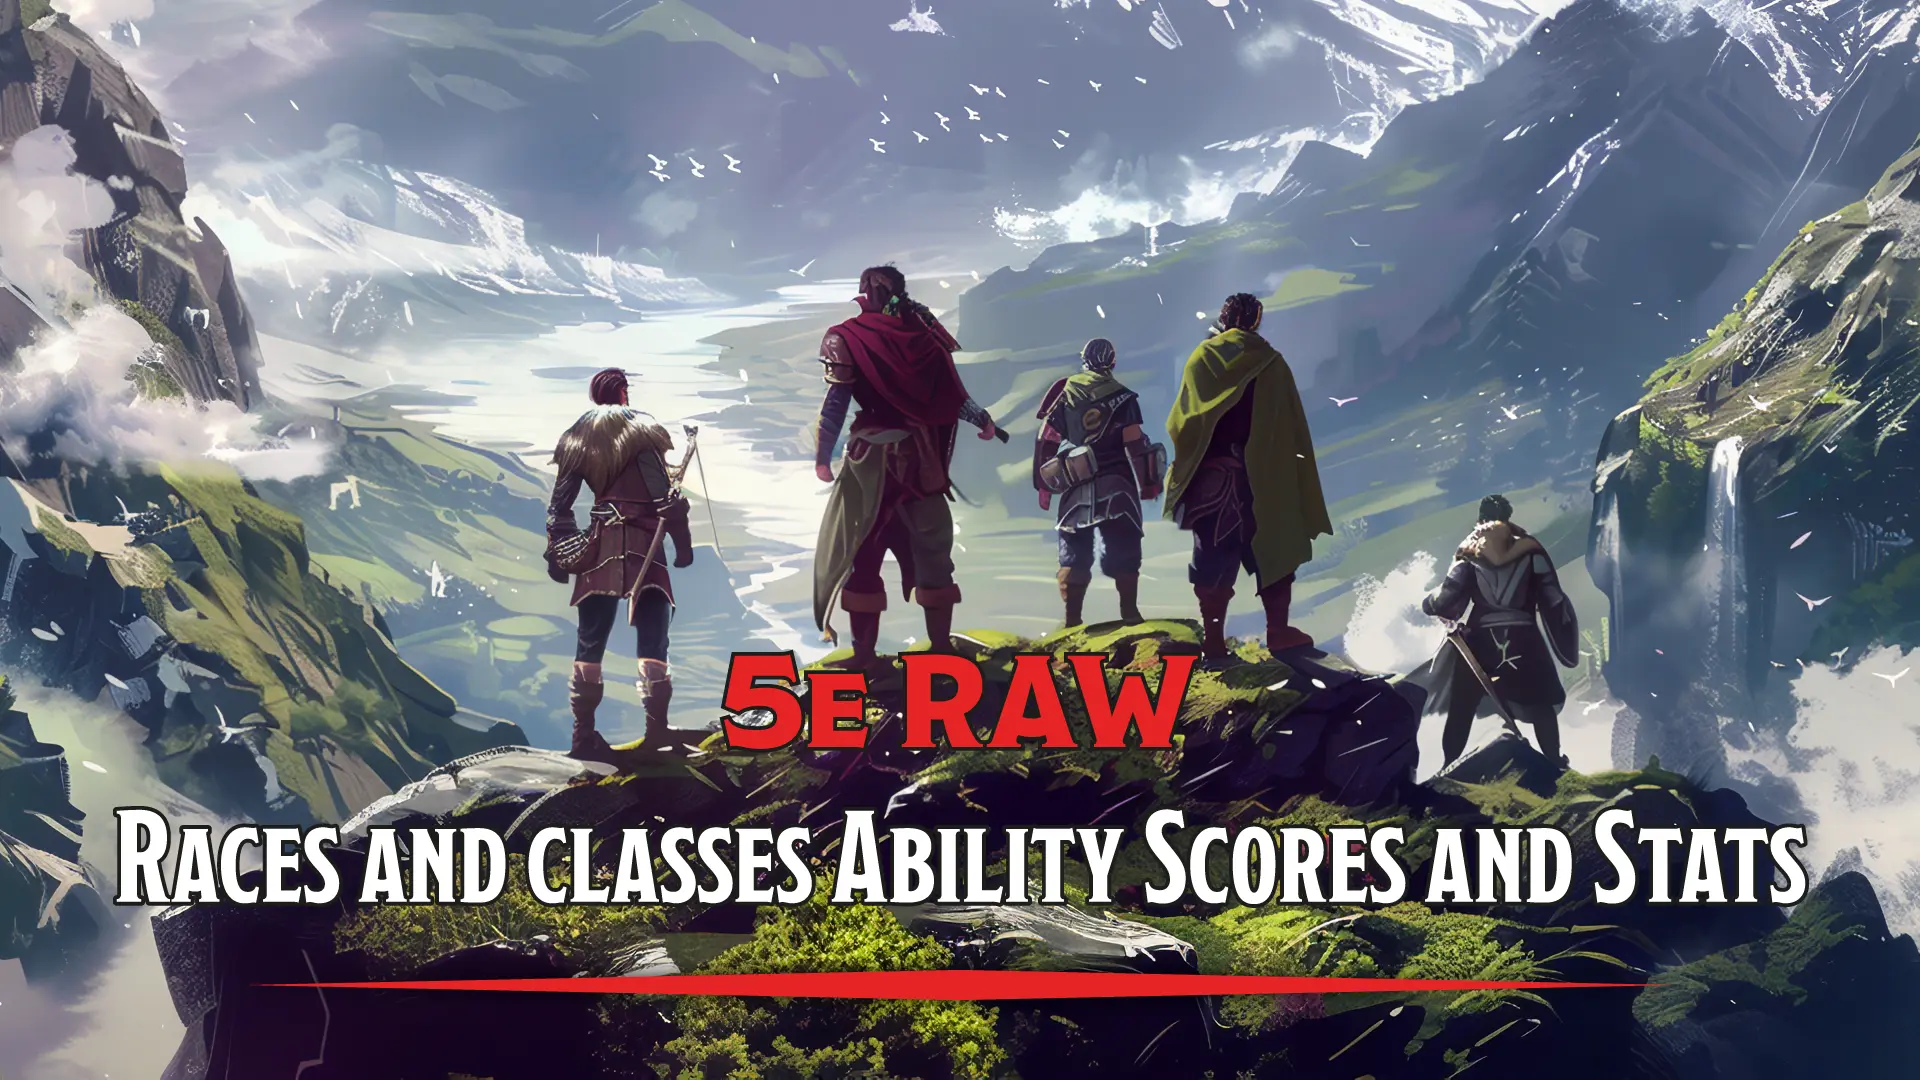 BG3 - 5e Raw - Races and Classes Ability Scores and Stats (ASI) Mod